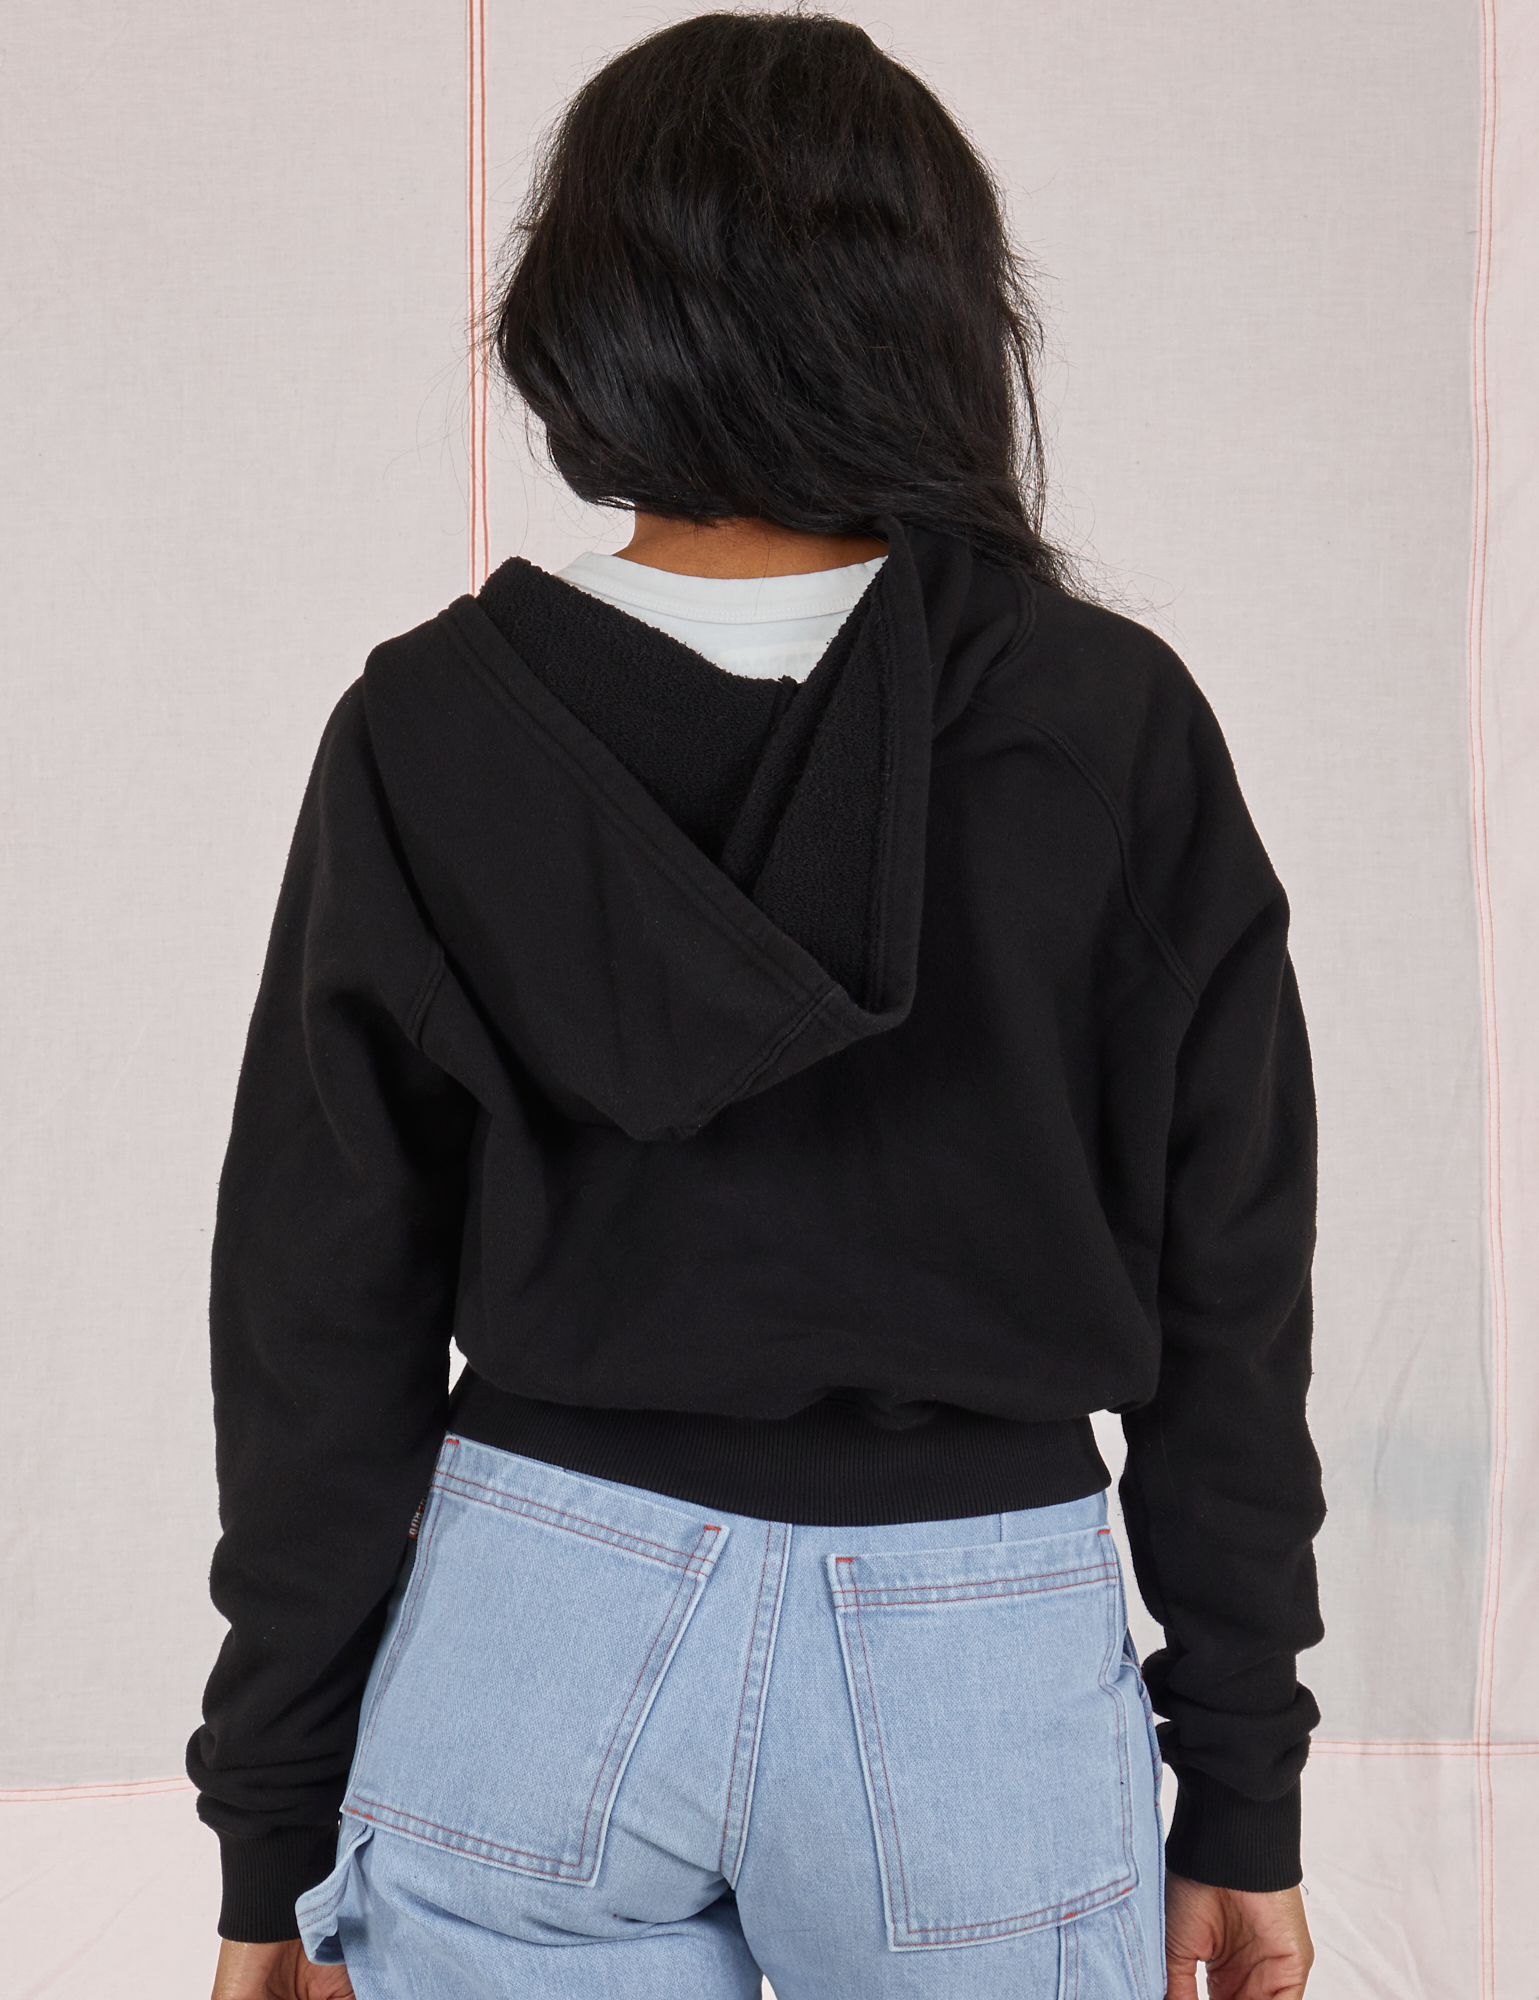 Cropped Zip Hoodie in Basic Black back view on Kandia